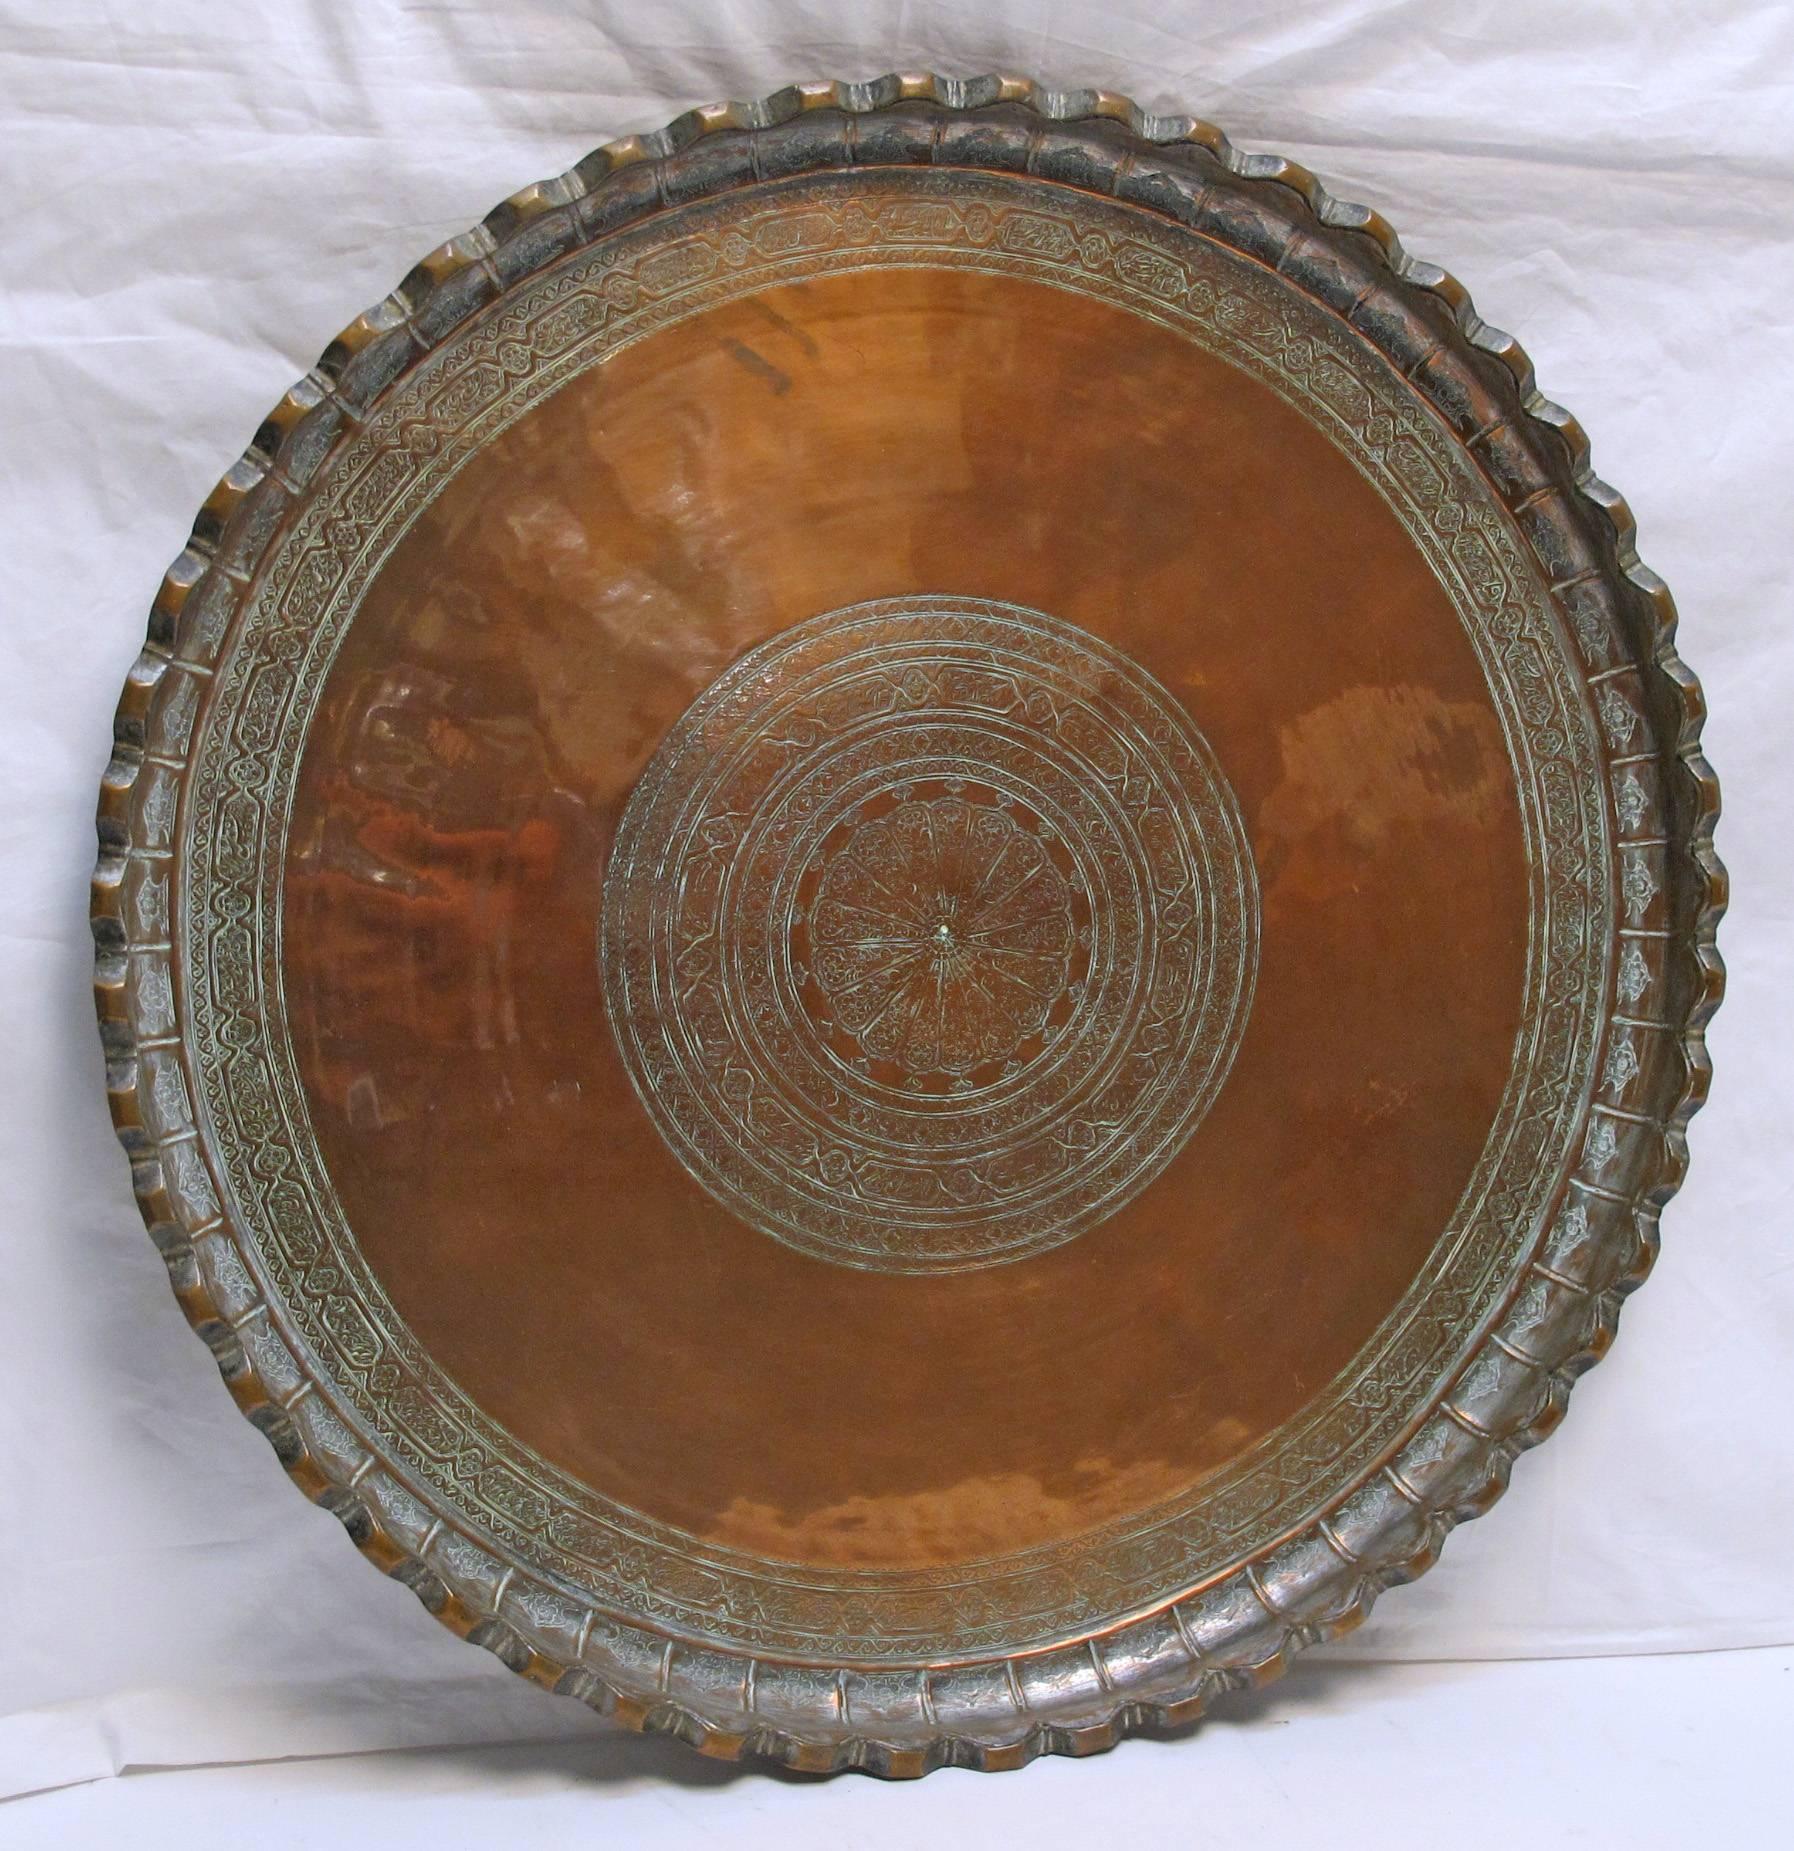 A large and heavy gage copper tray. Lovely quality well made tray (most likely this is not a tourist item).